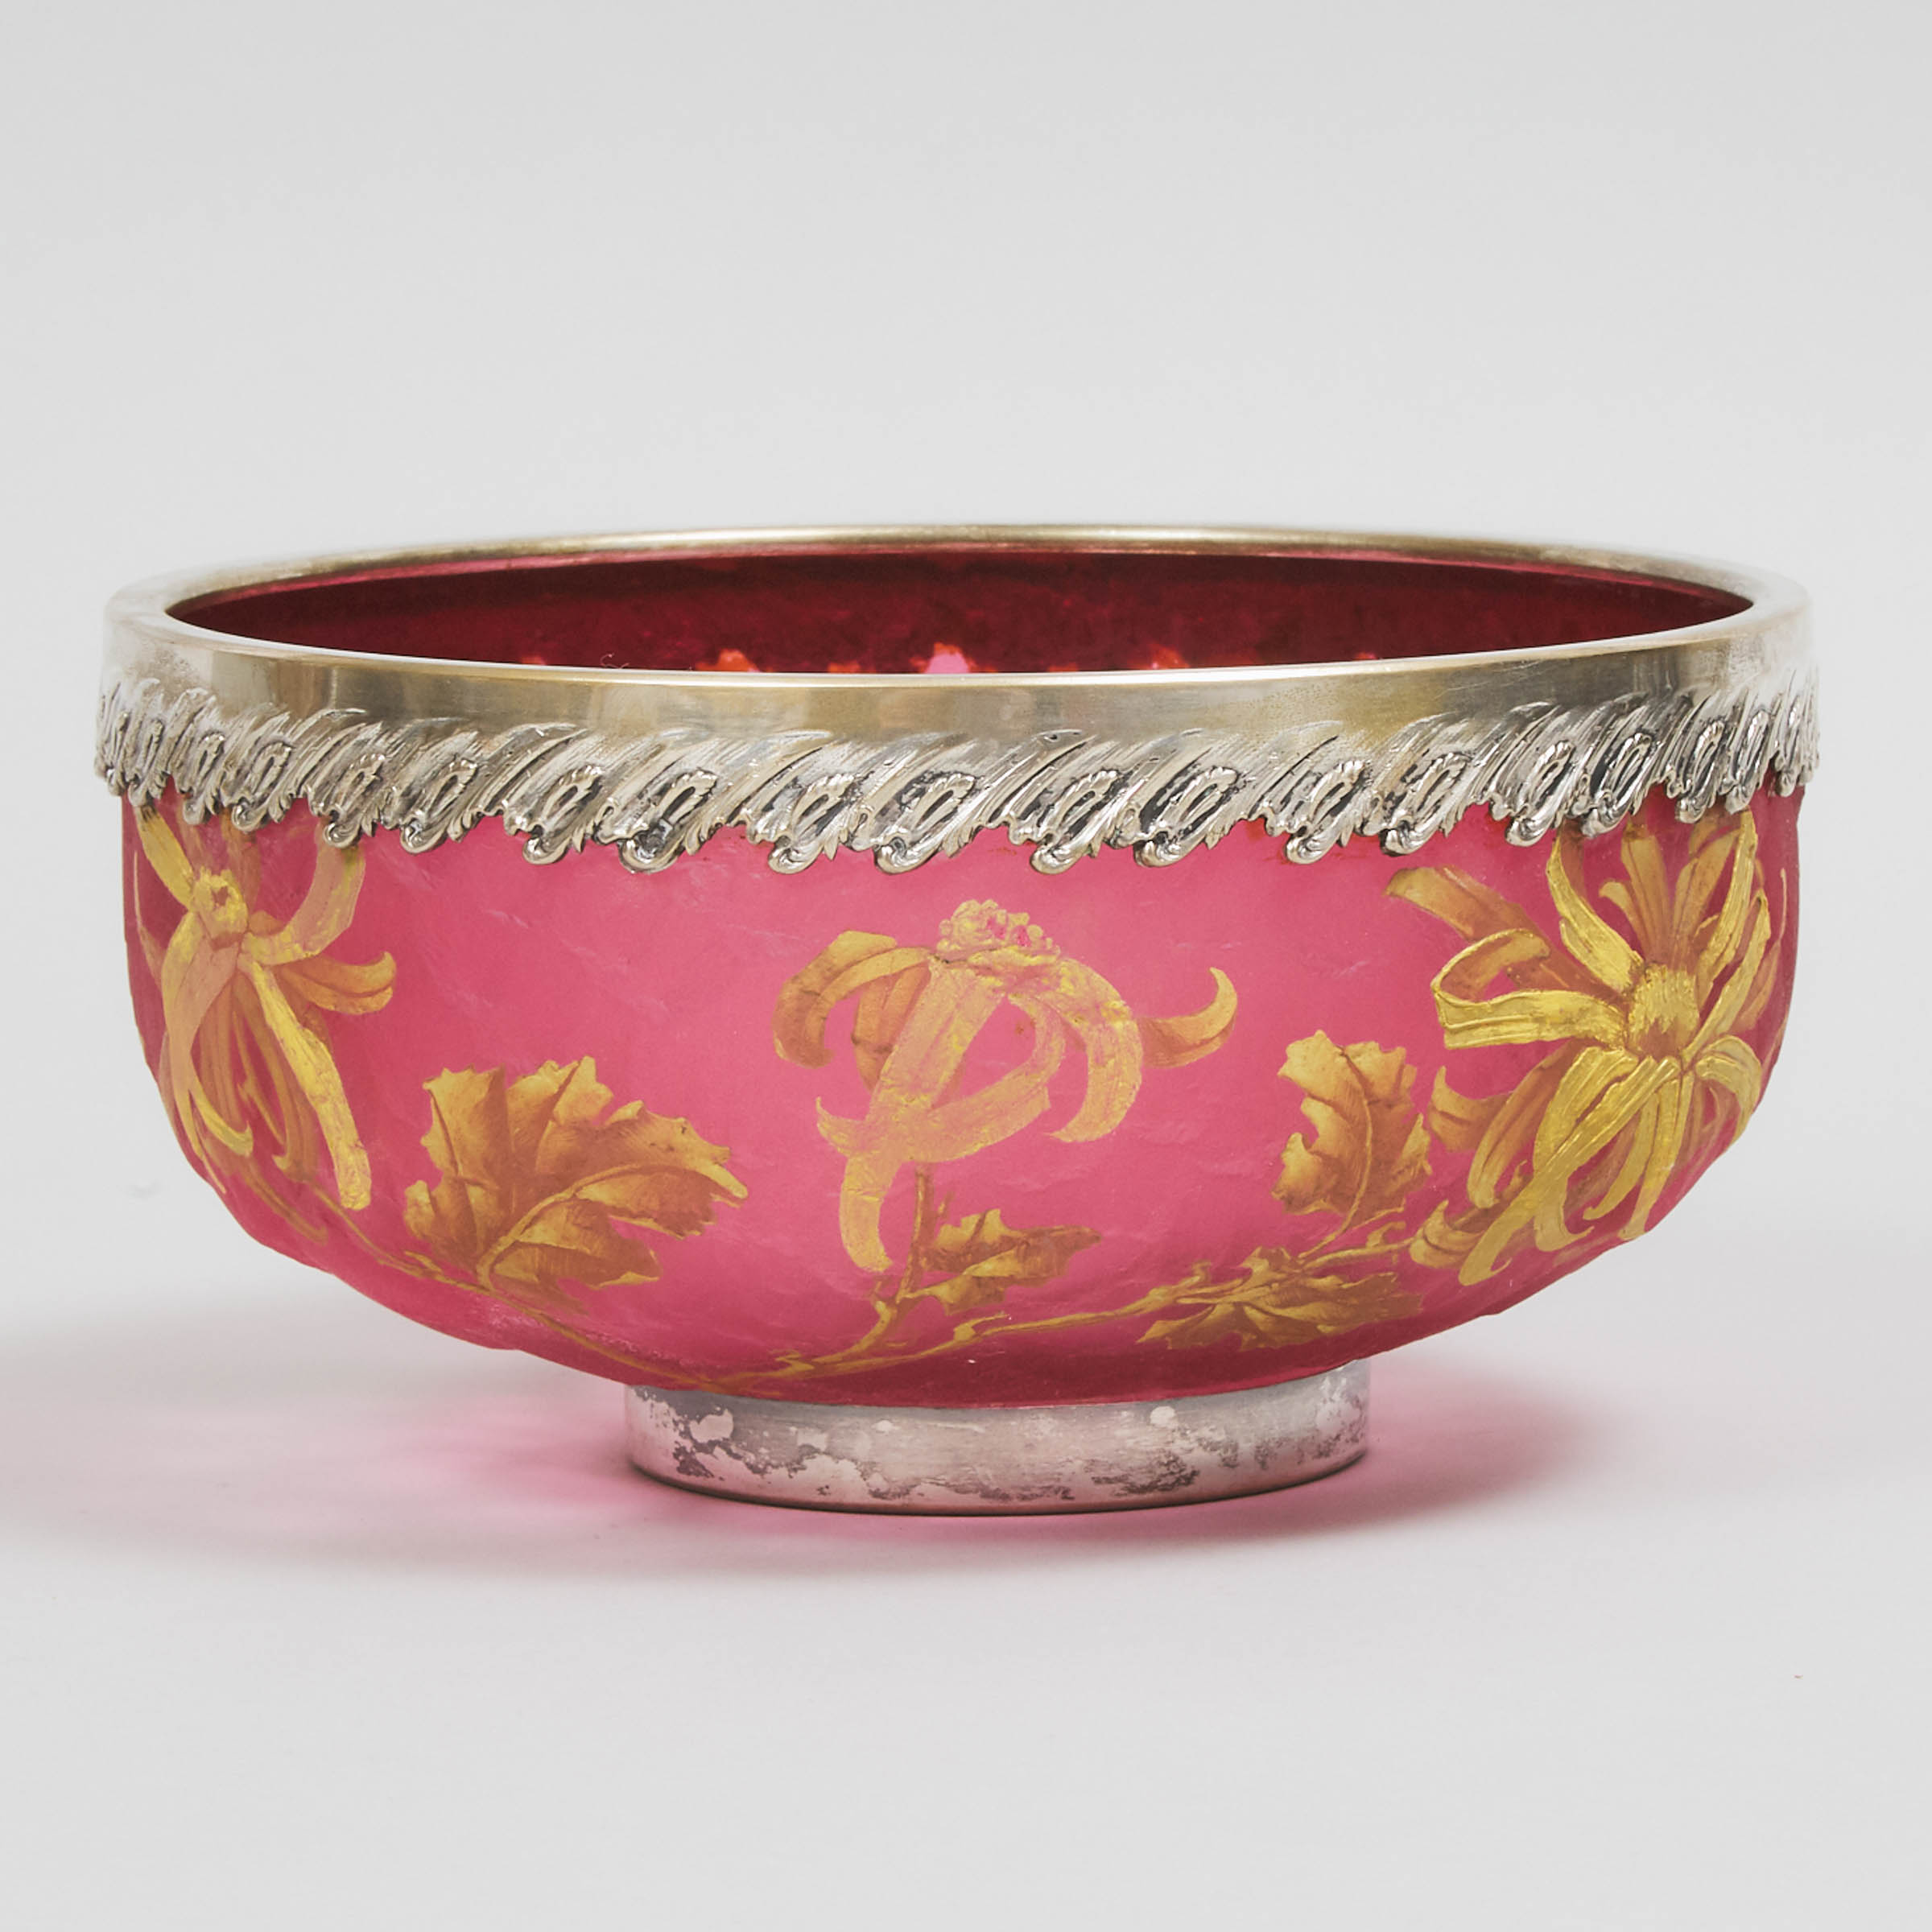 Victor Saglier Silvered Metal Mounted, Etched and Gilt Red Glass Bowl, c.1900